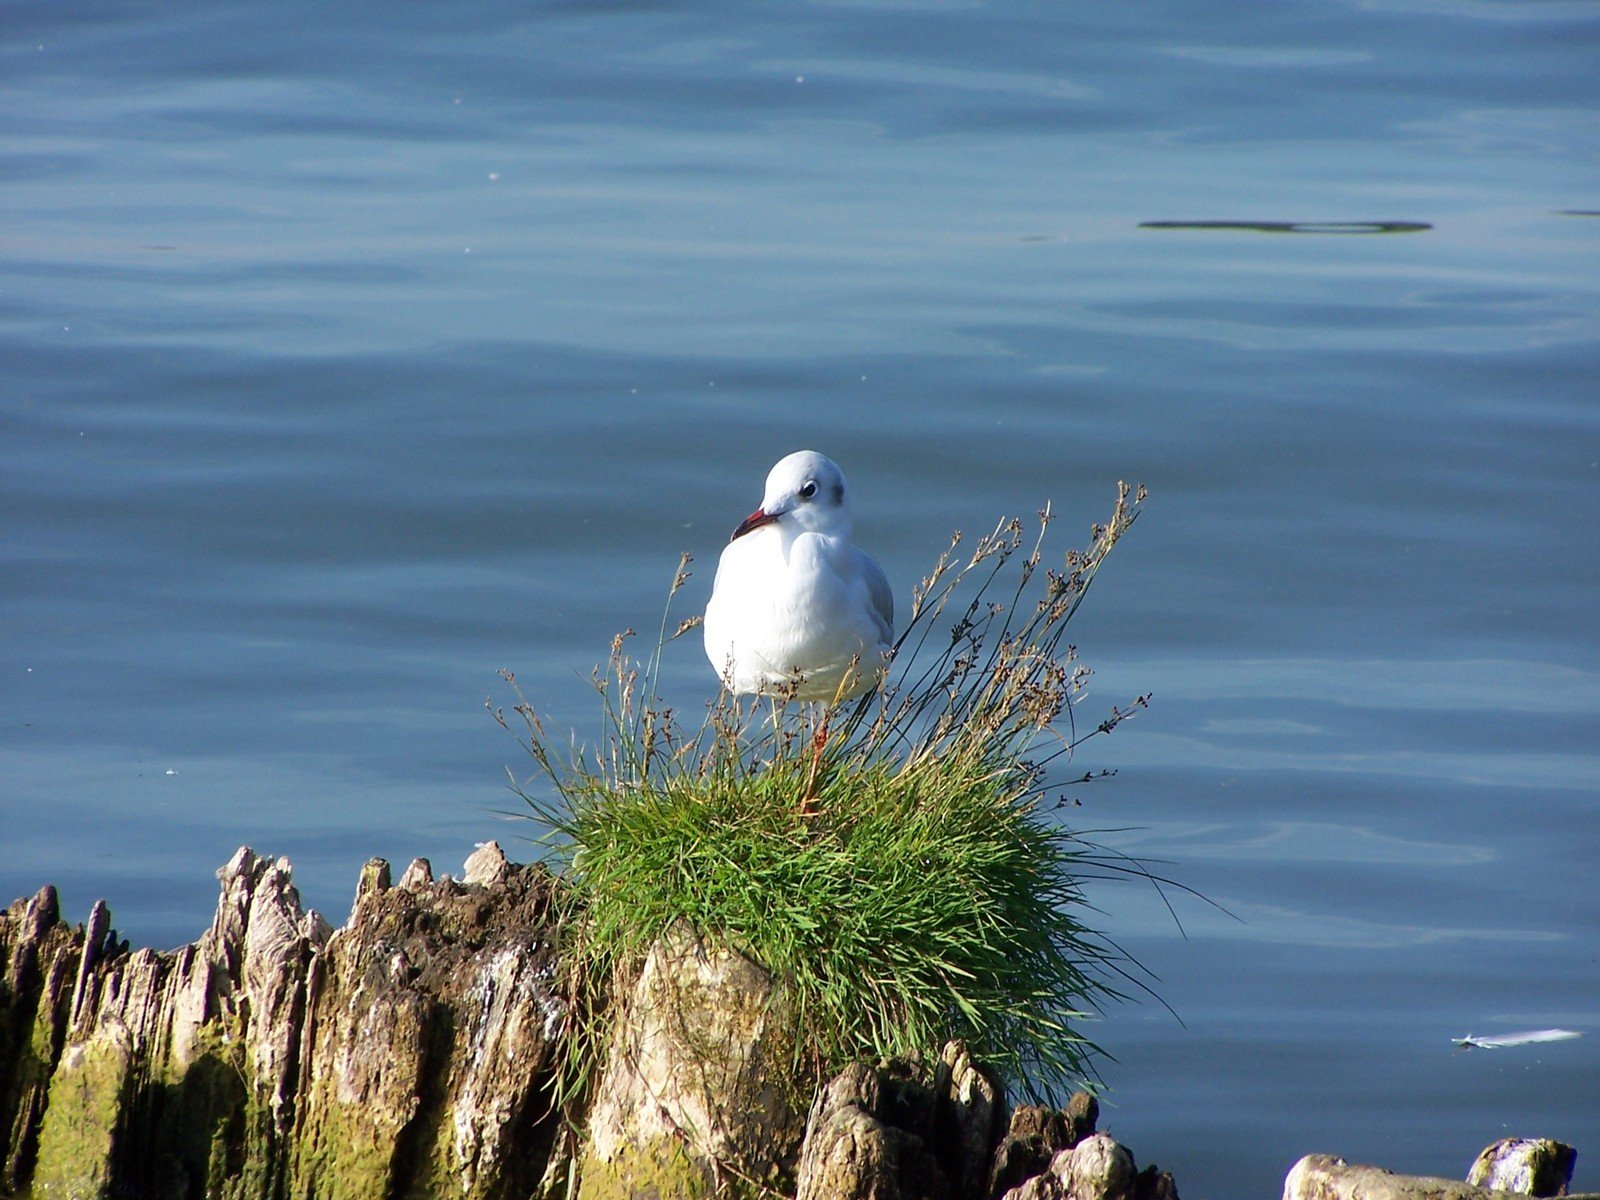 a seagull perched on top of some plants